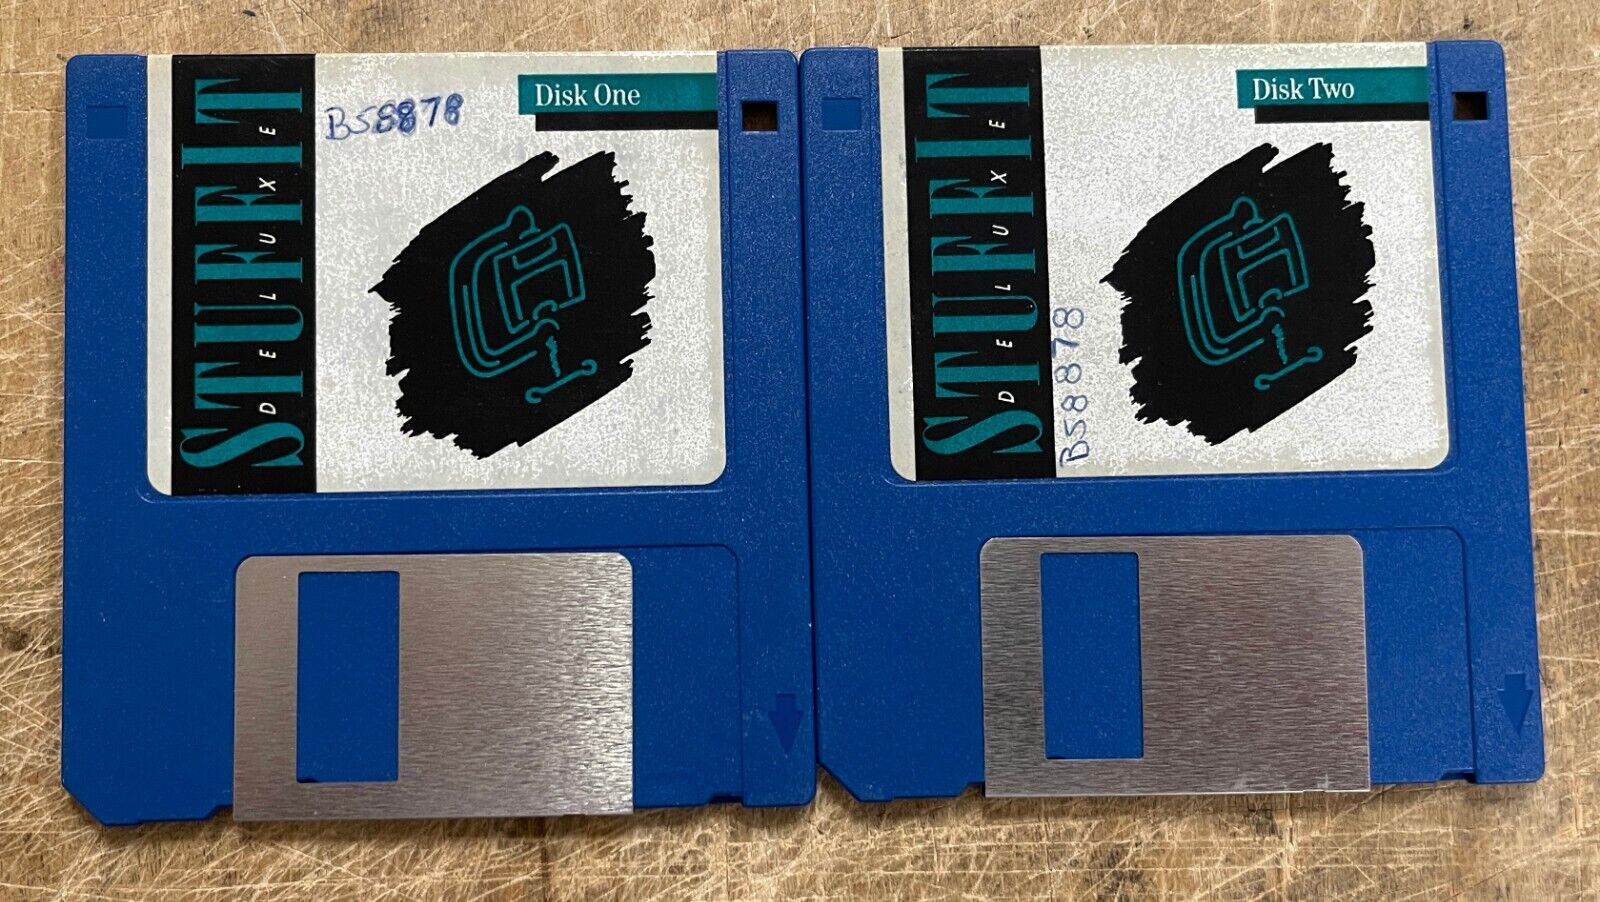 Vintage Stuffit Deluxe V 3.0.5 for Mac on 2 Floppy Disks TESTED and READABLE